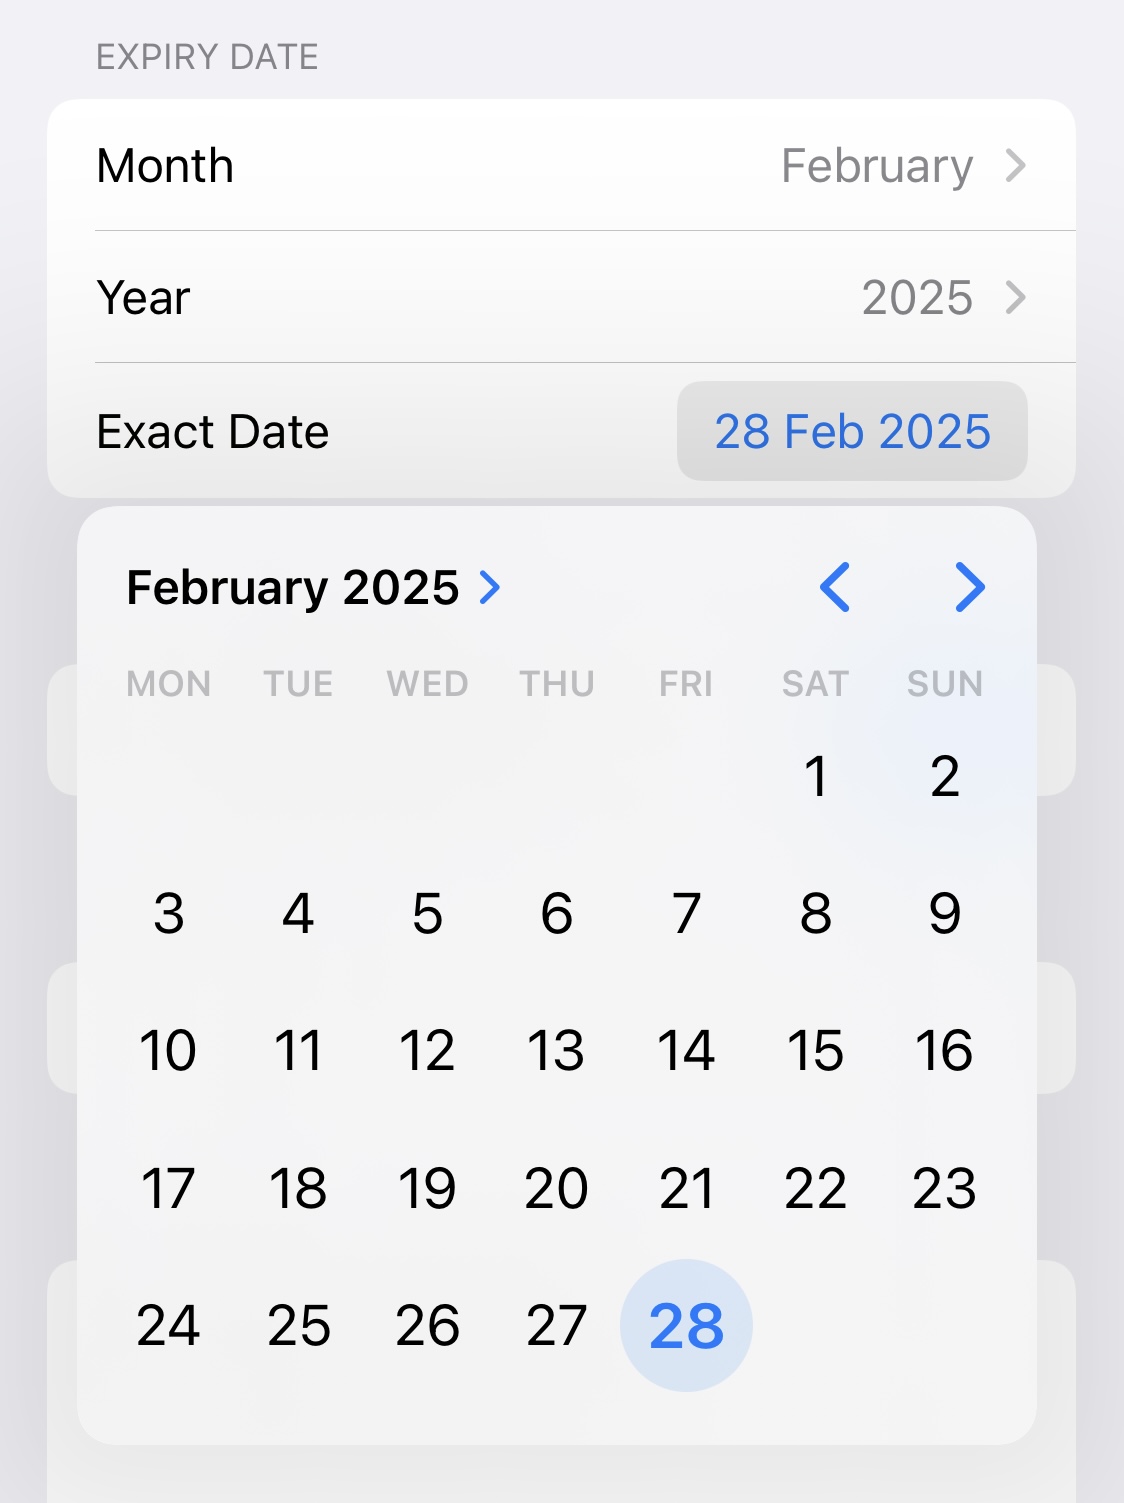 A date picker to select an exact expiry date.